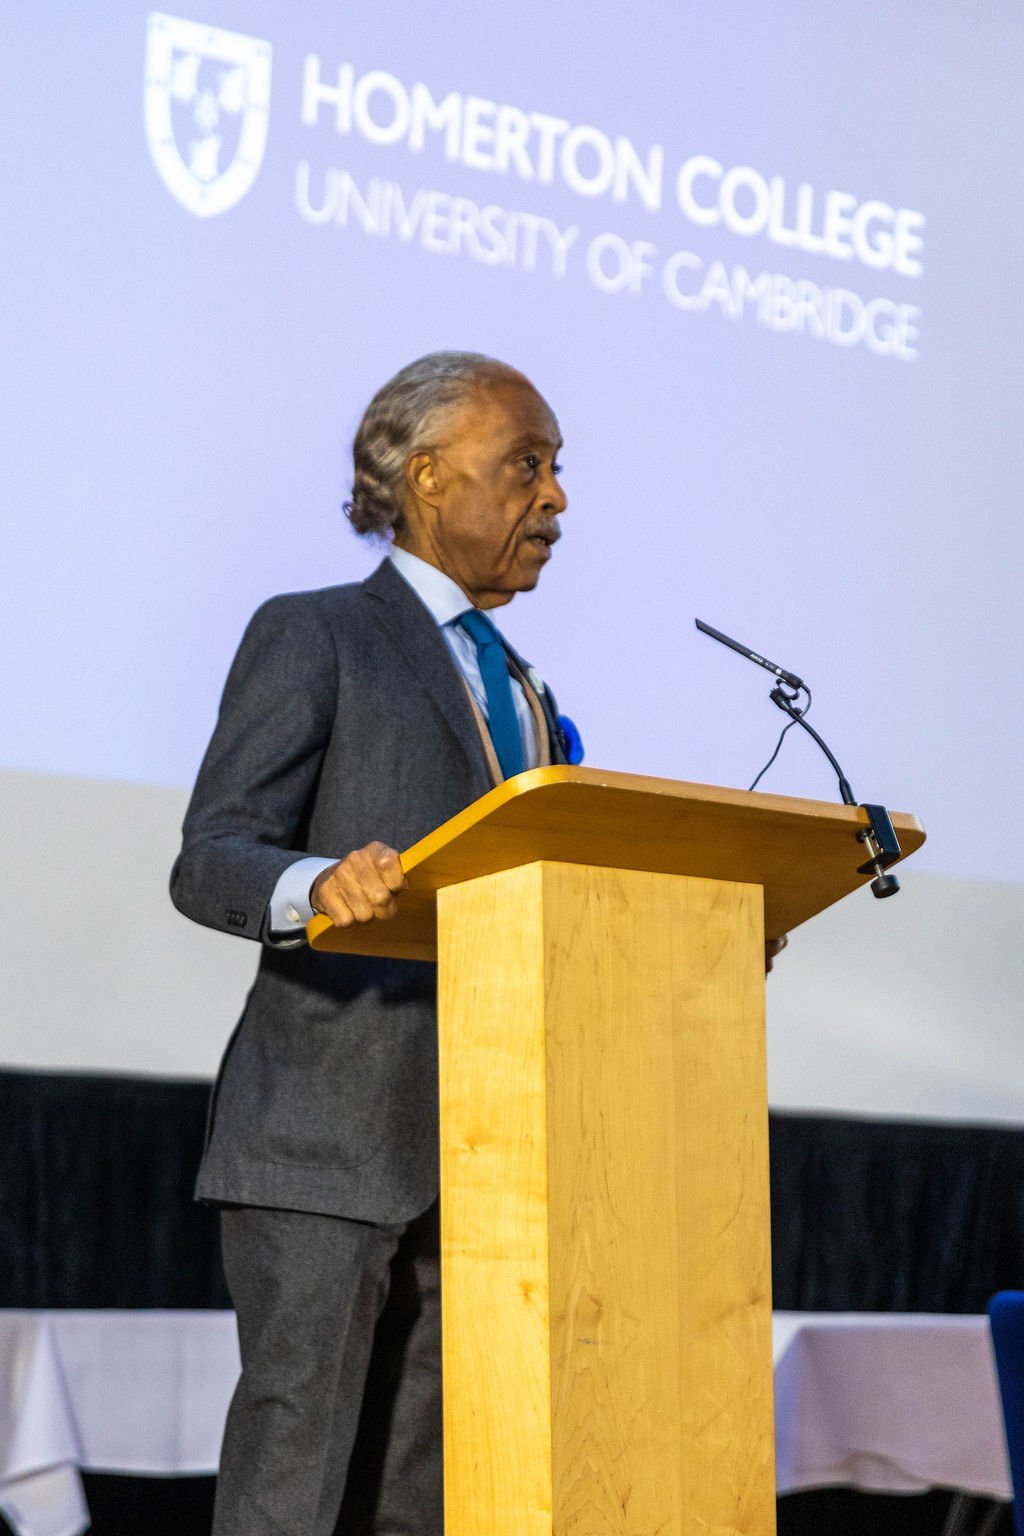 Rev Al Sharpton speaking from a lectern at Homerton College